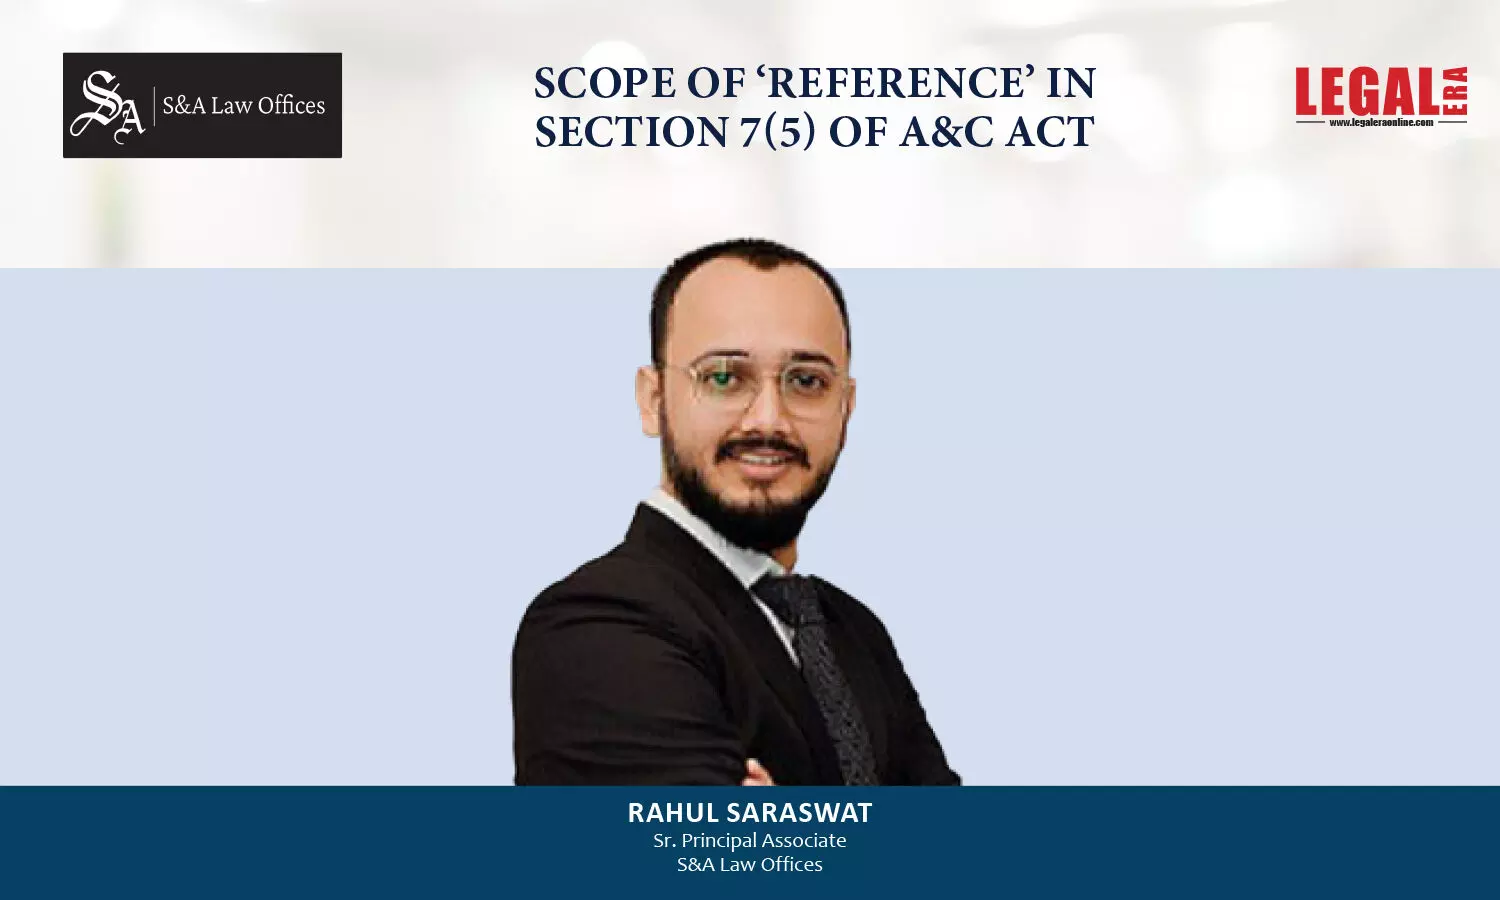 Scope Of ‘Reference’ In Section 7(5) Of A&C Act